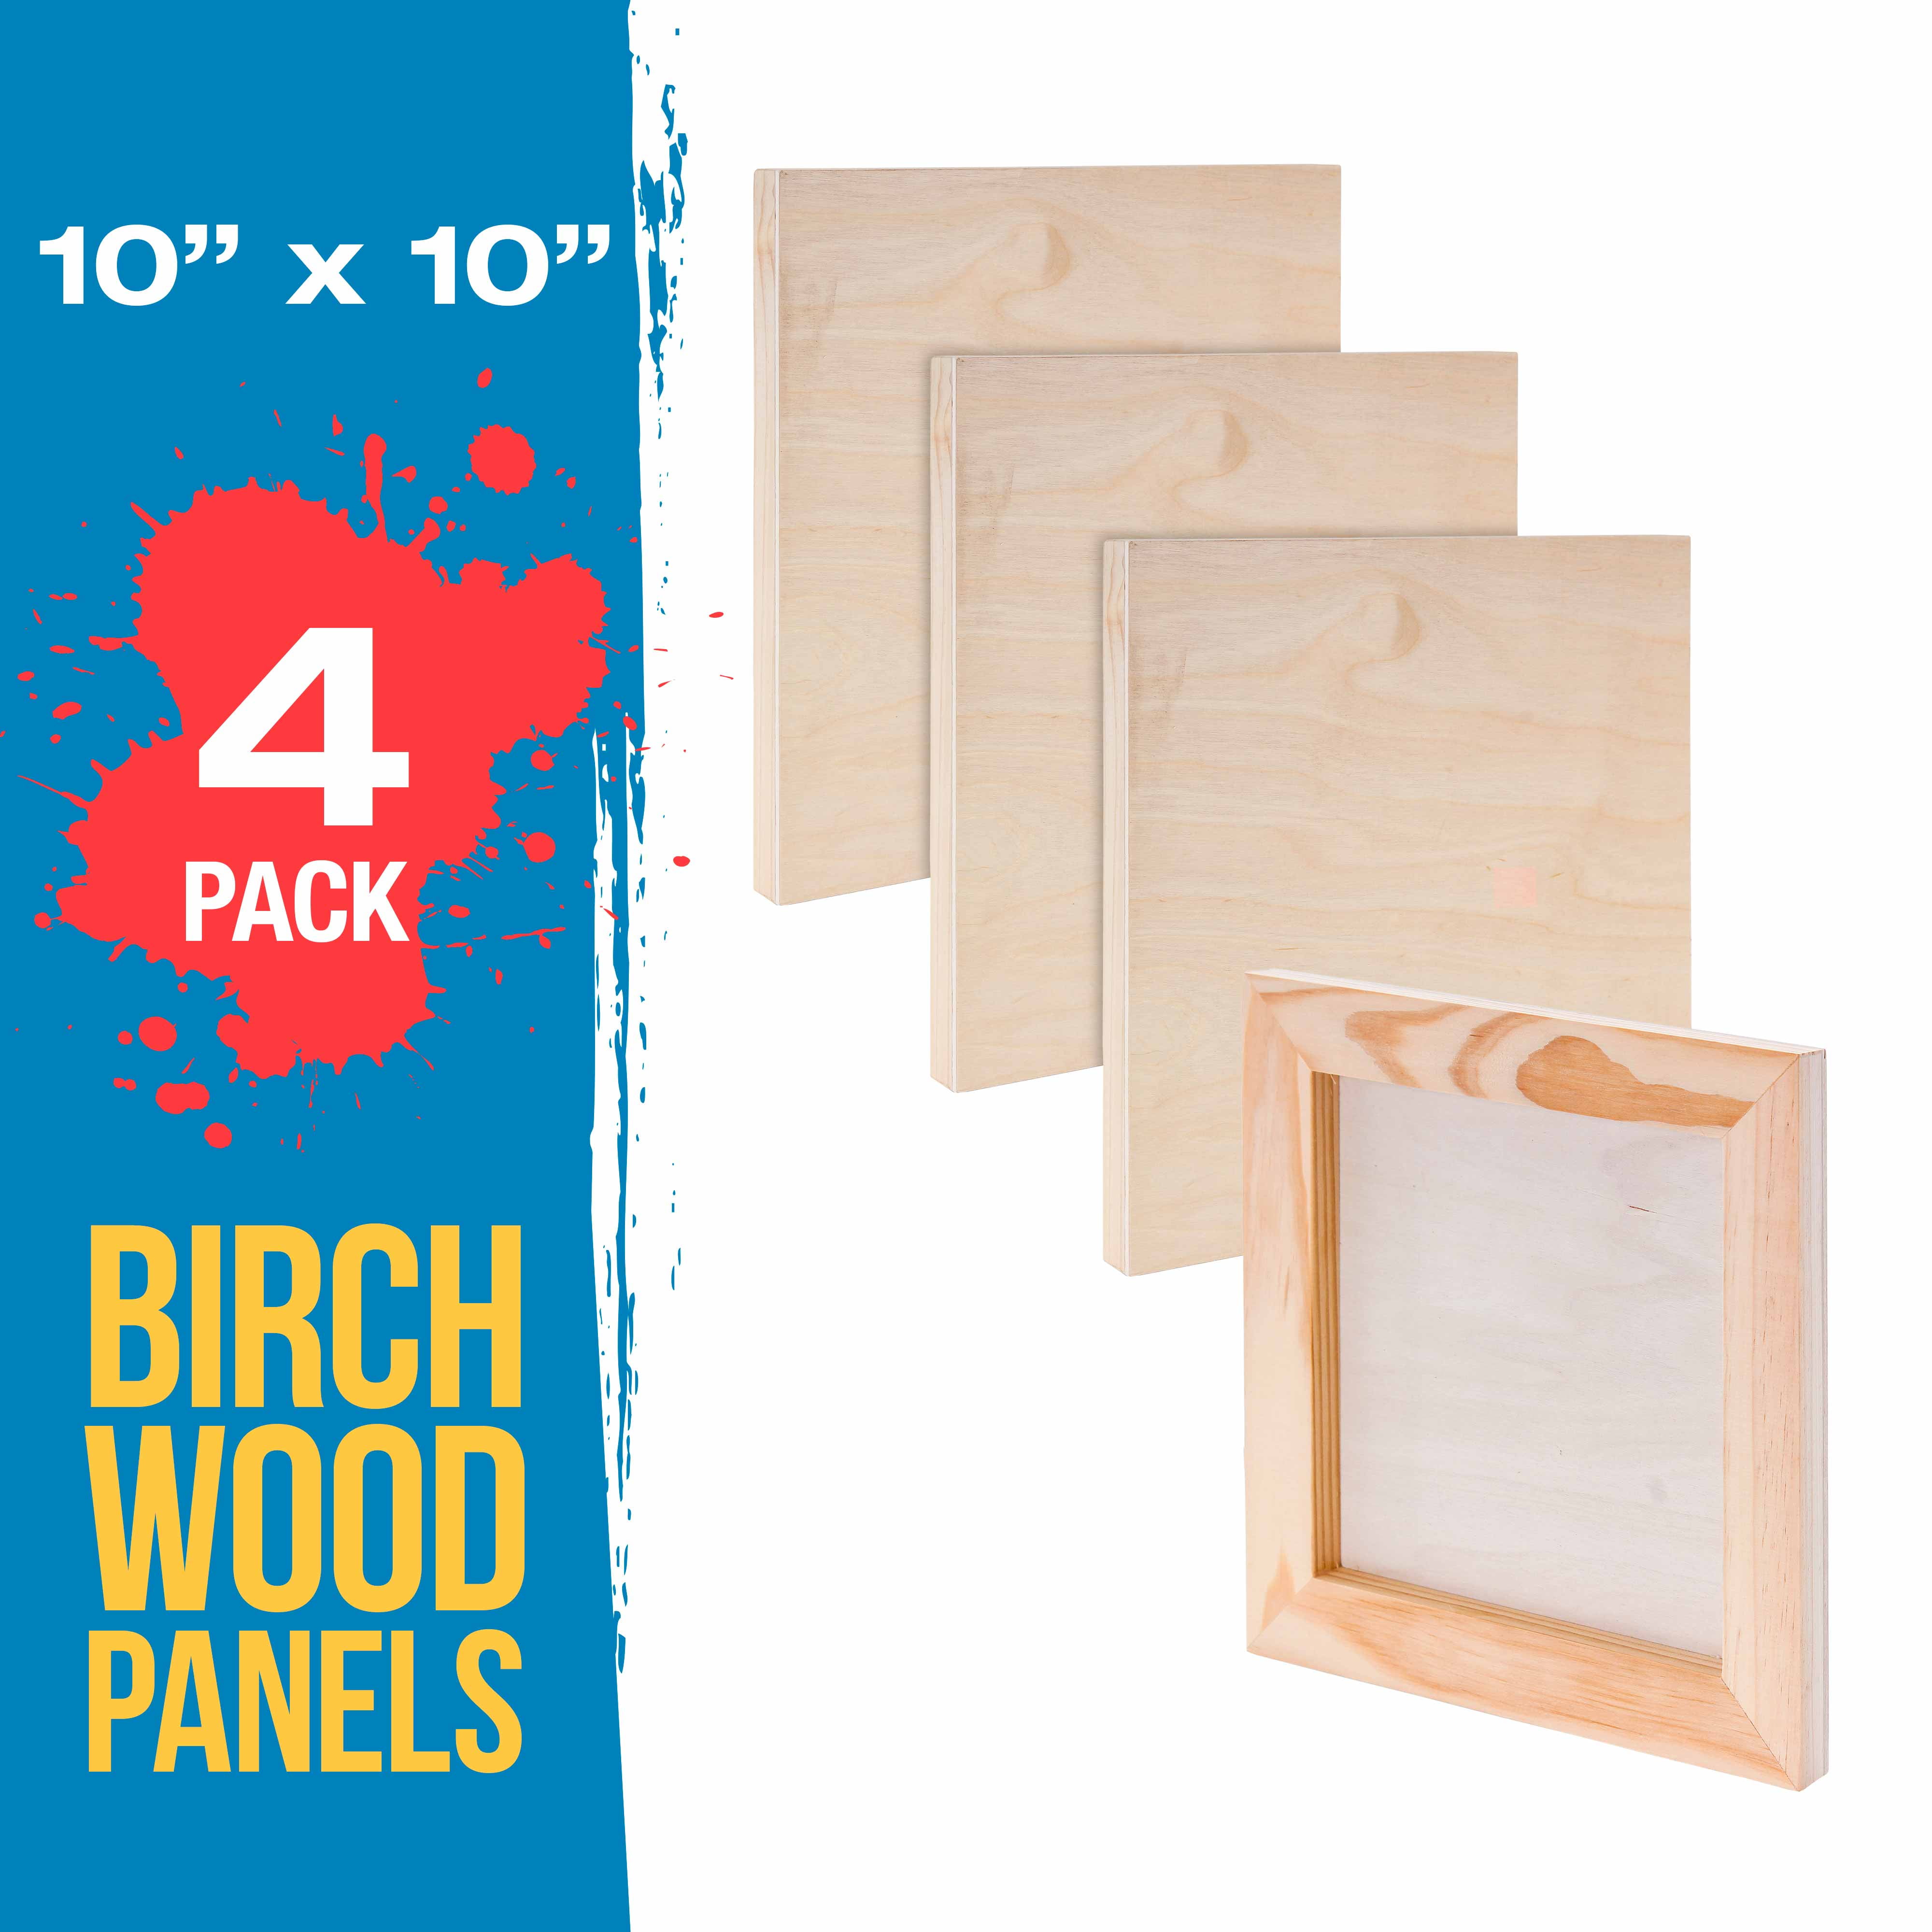 11" x 14" Studio 3/4" Profile Depth Artist Wood Pouring Panel Boards Pack of 3 